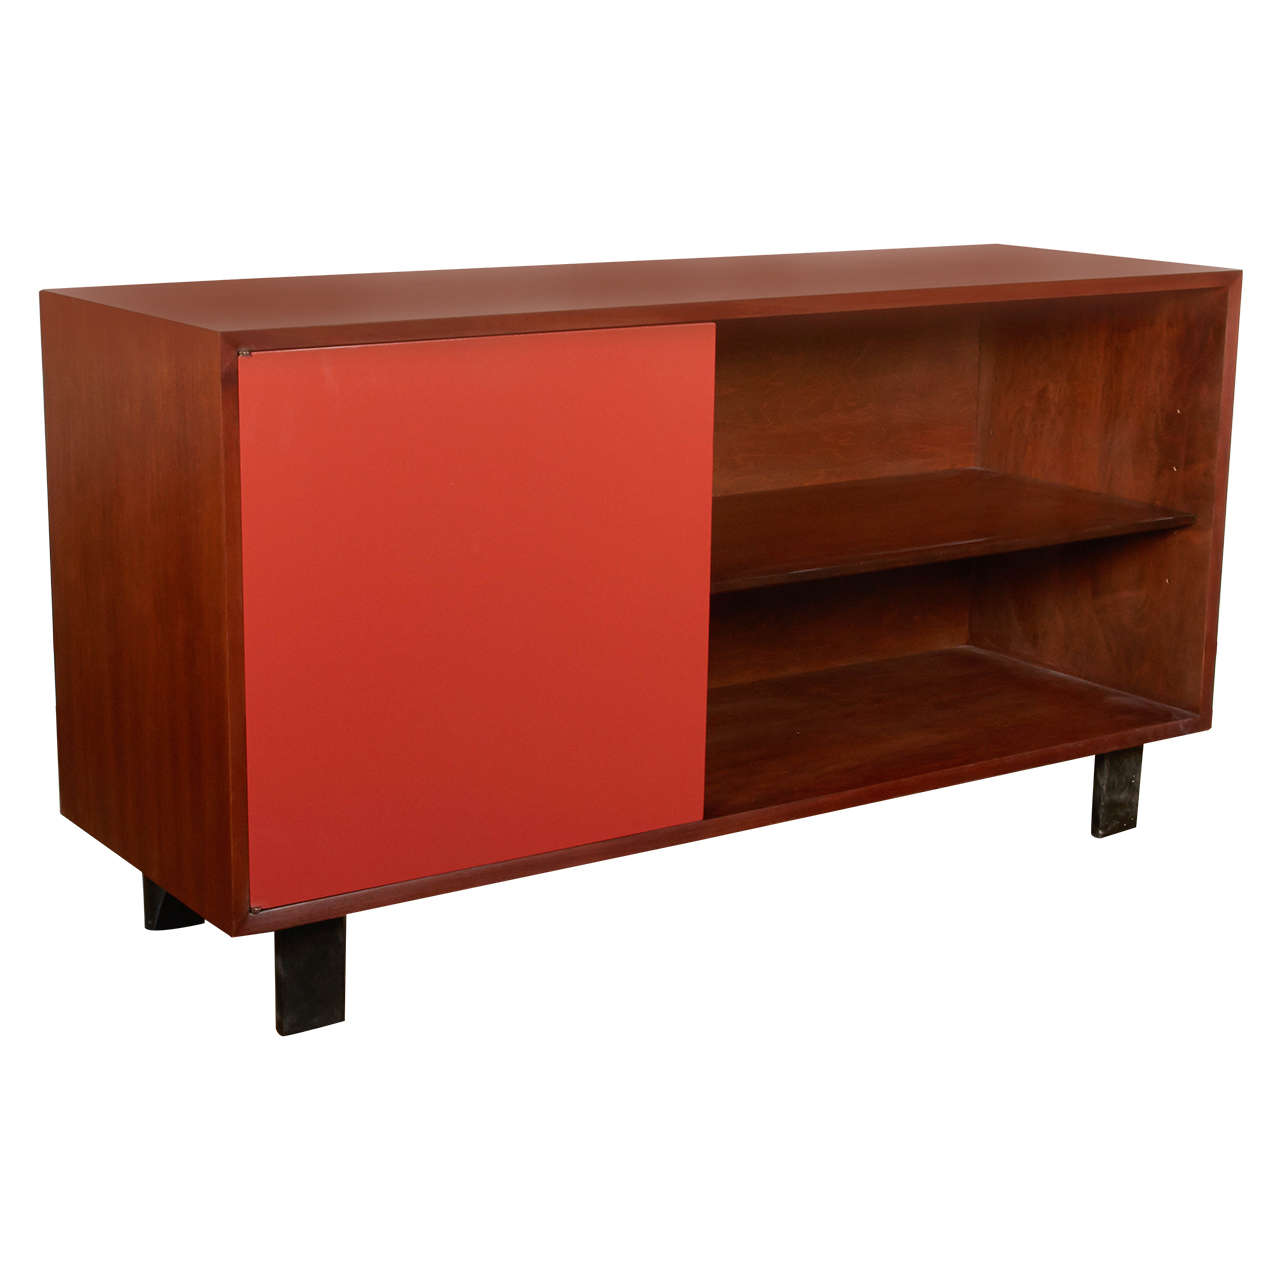 George Nelson Walnut Bookcase with Red Lacquered Door, Herman Miller